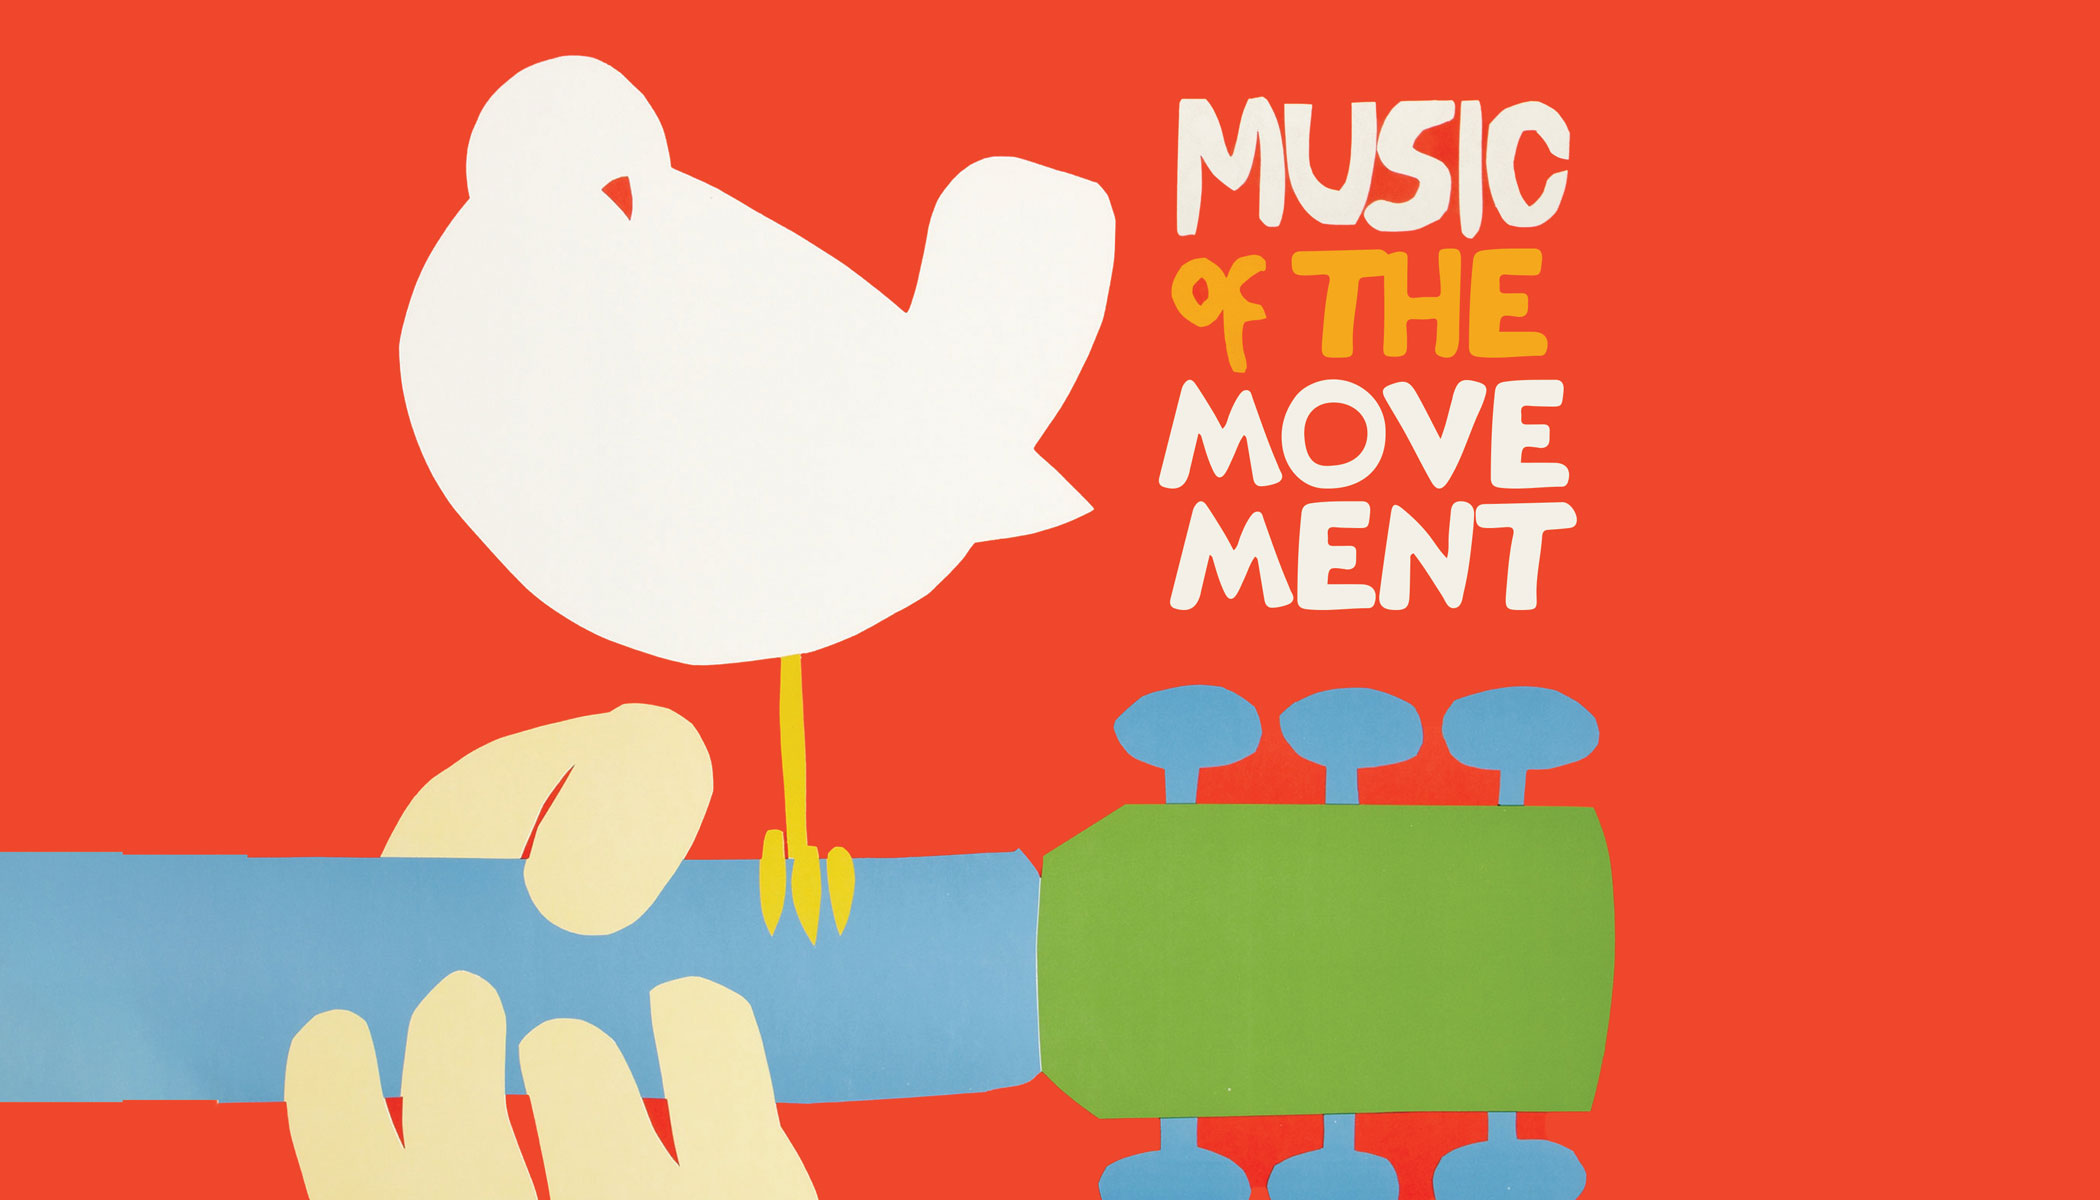 Music of the Movement